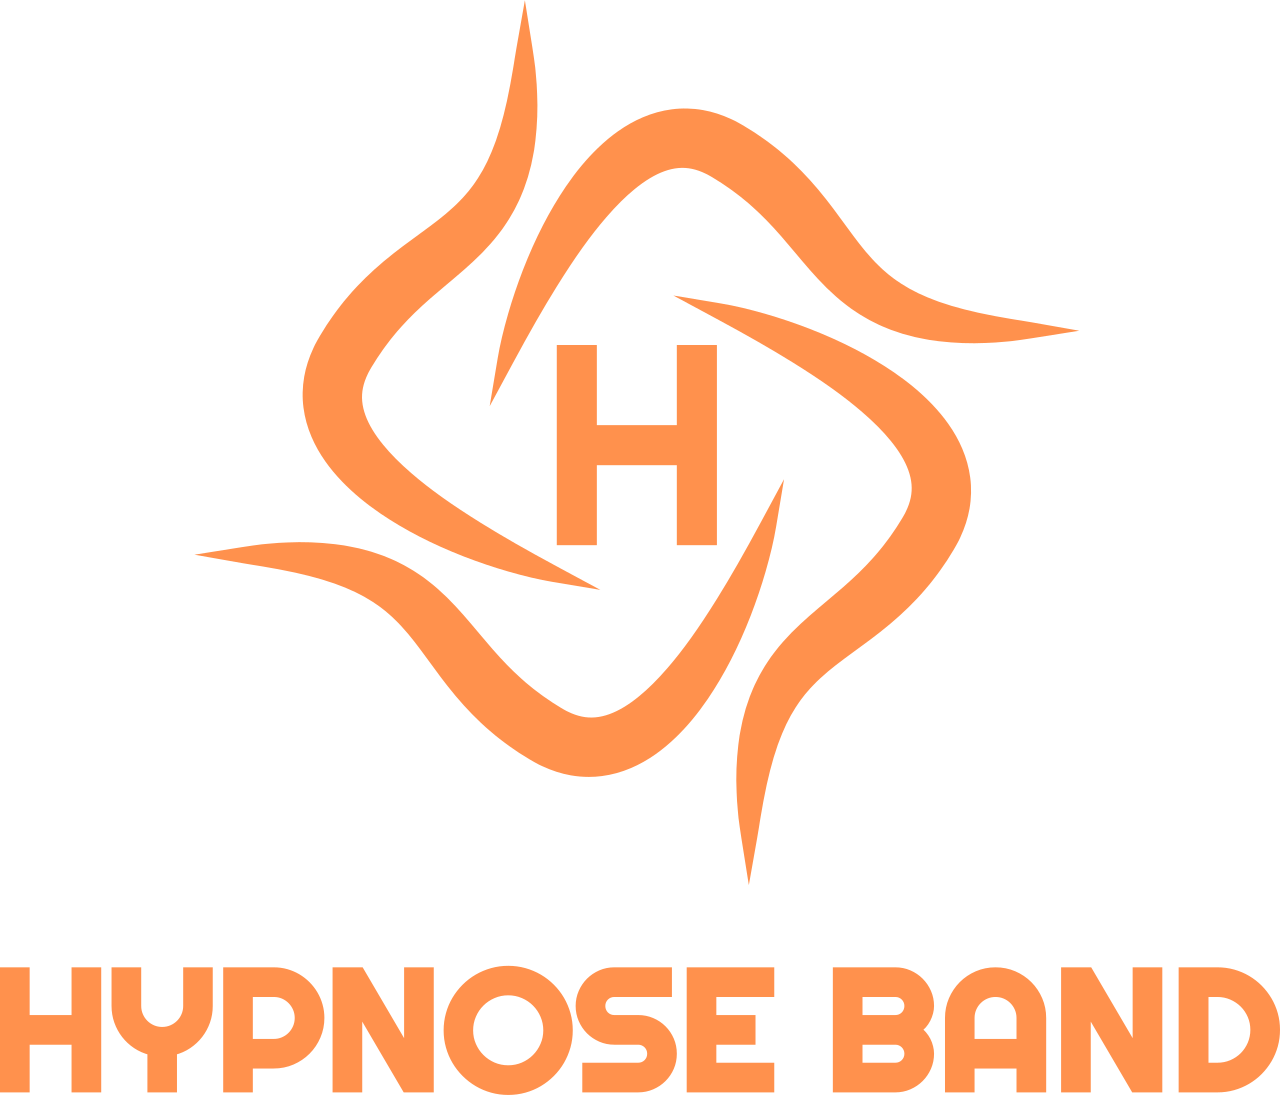 HYPNOSE BAND's web page